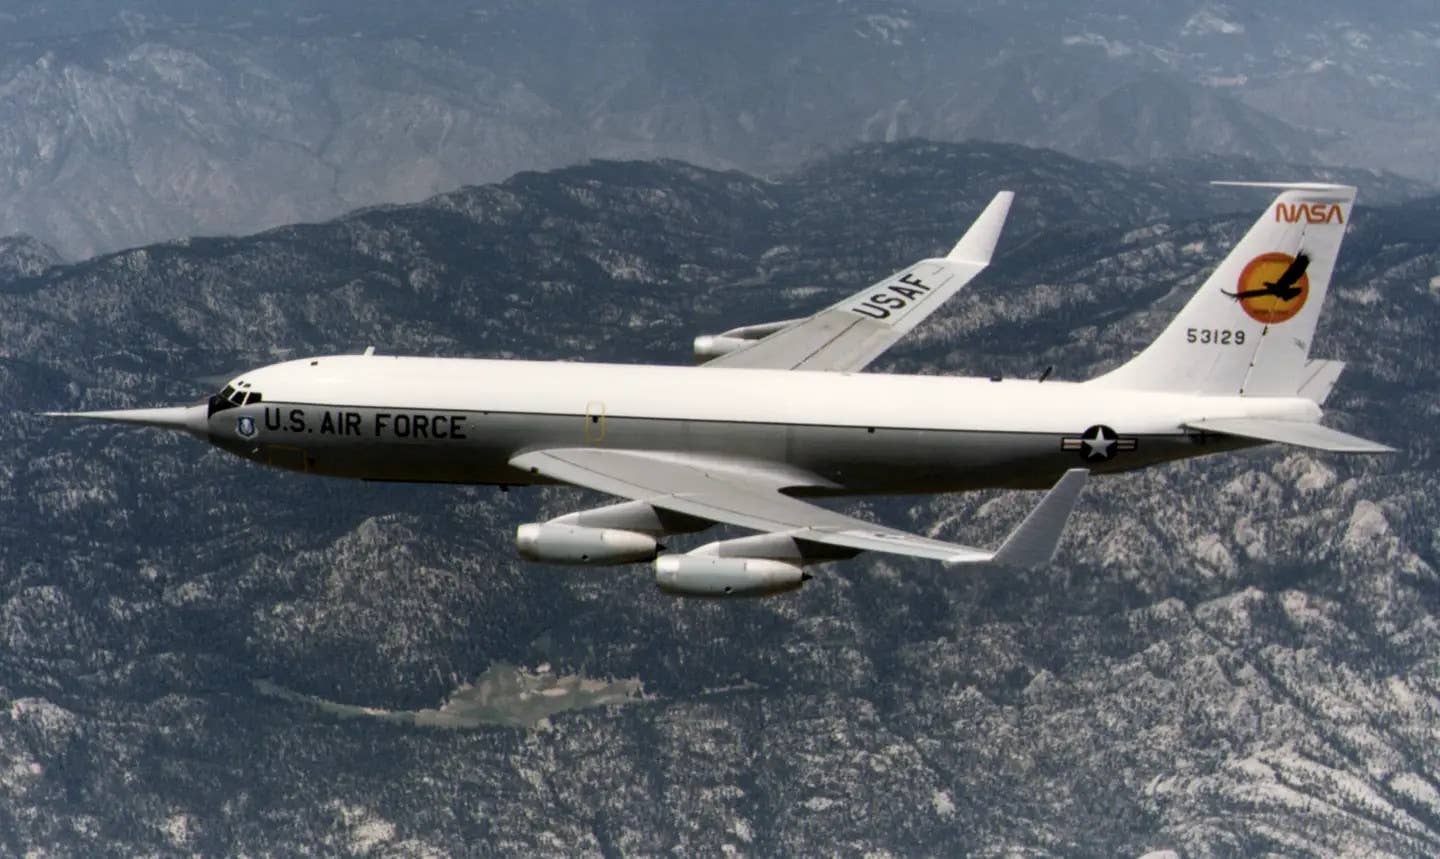 NKC-135A  serial number 55-3129 with the winglets installed. The aircraft also has a large flight data probe installed on the nose. <em>NASA</em>